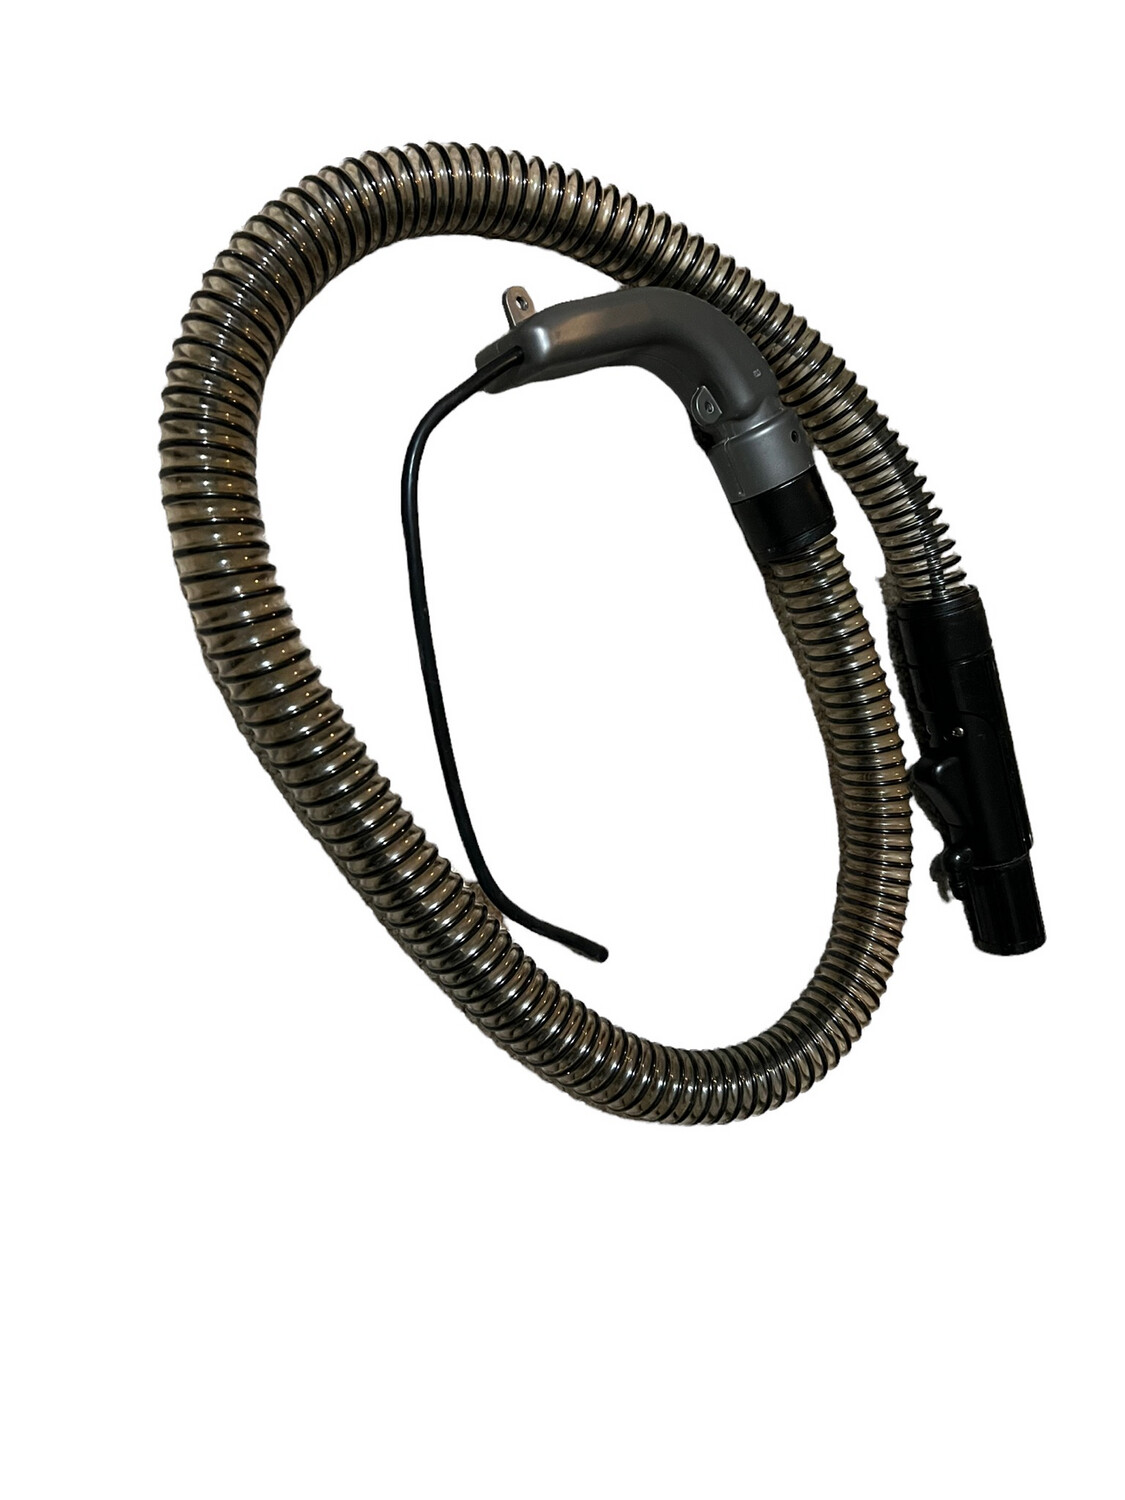 Genuine Bissell 5207w Spot Clean Hose and Handle Assembly